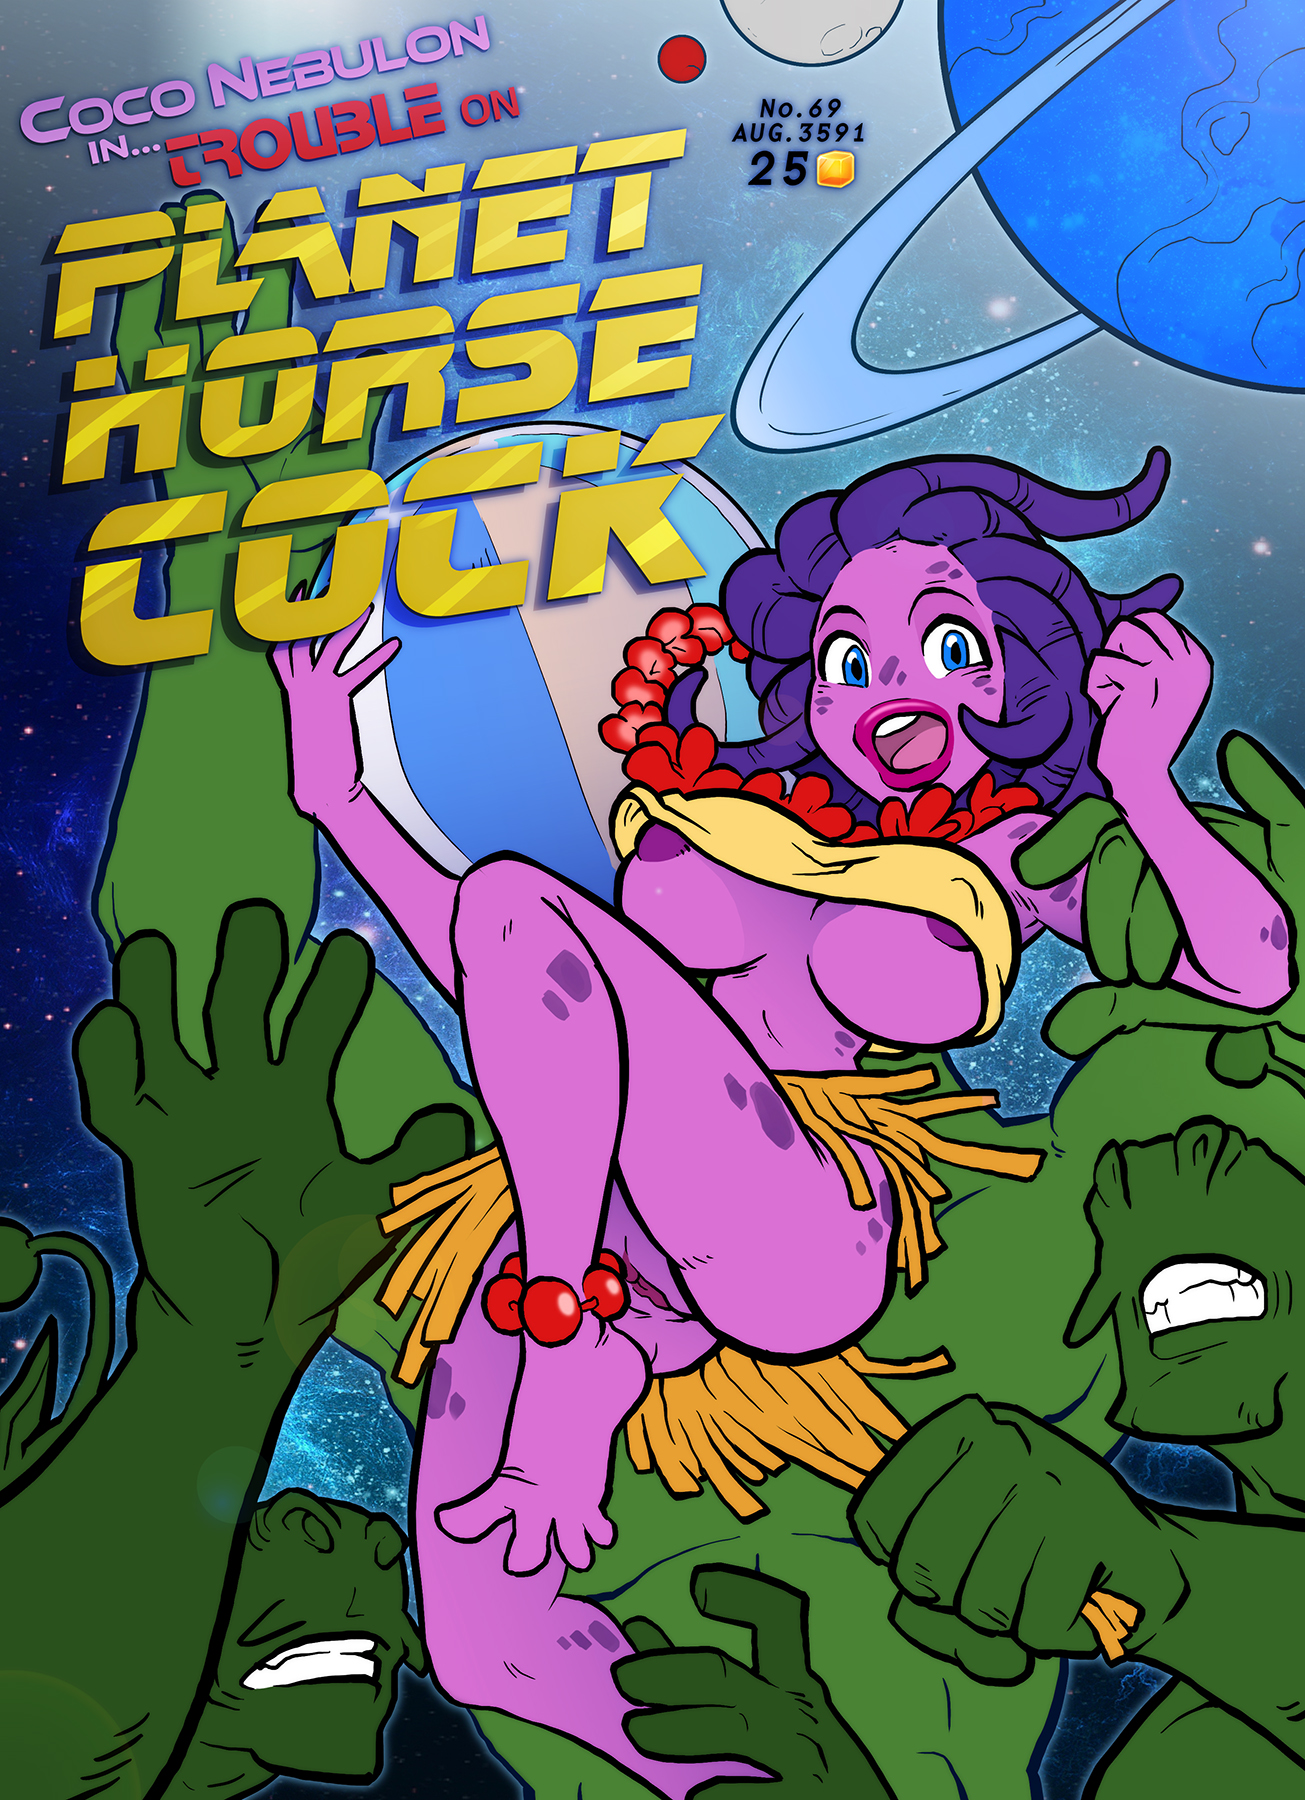 Updated Sparrow Coco Nebulon in Trouble On Planet Horse Cock Porn Comics